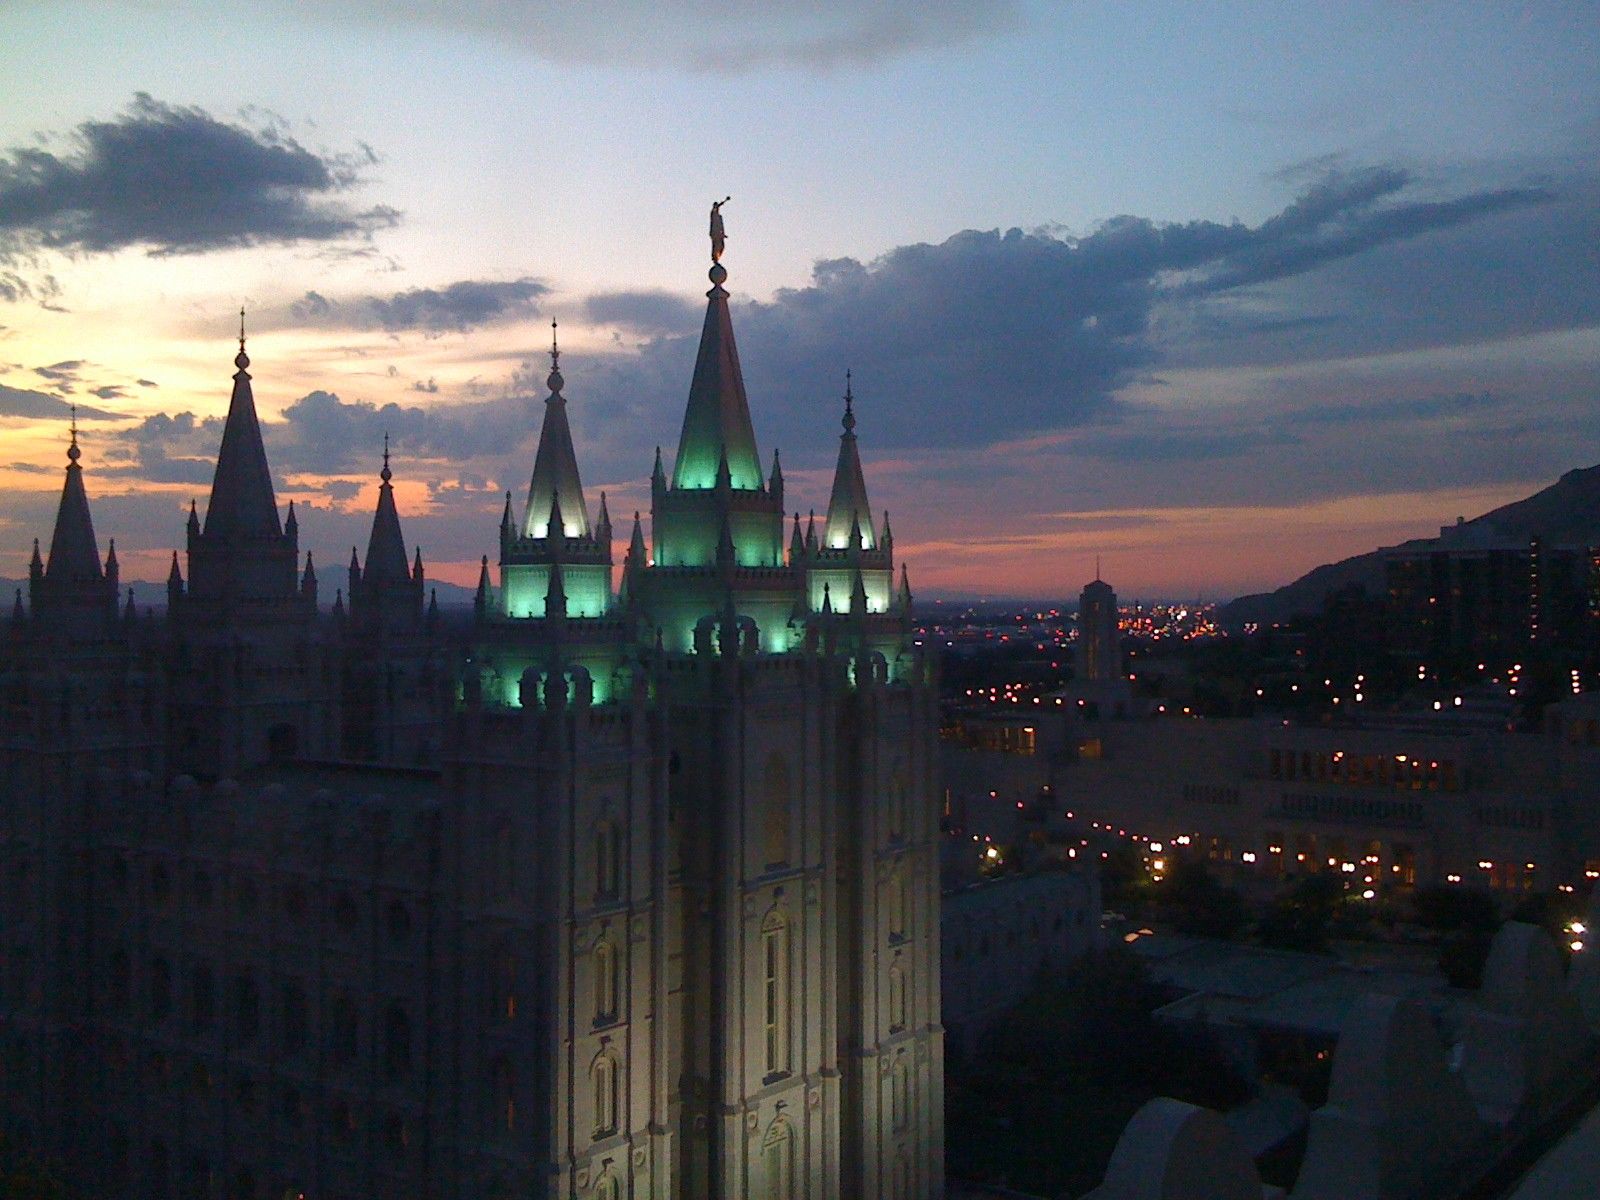 The Salt Lake Temple in the evening, including the city.